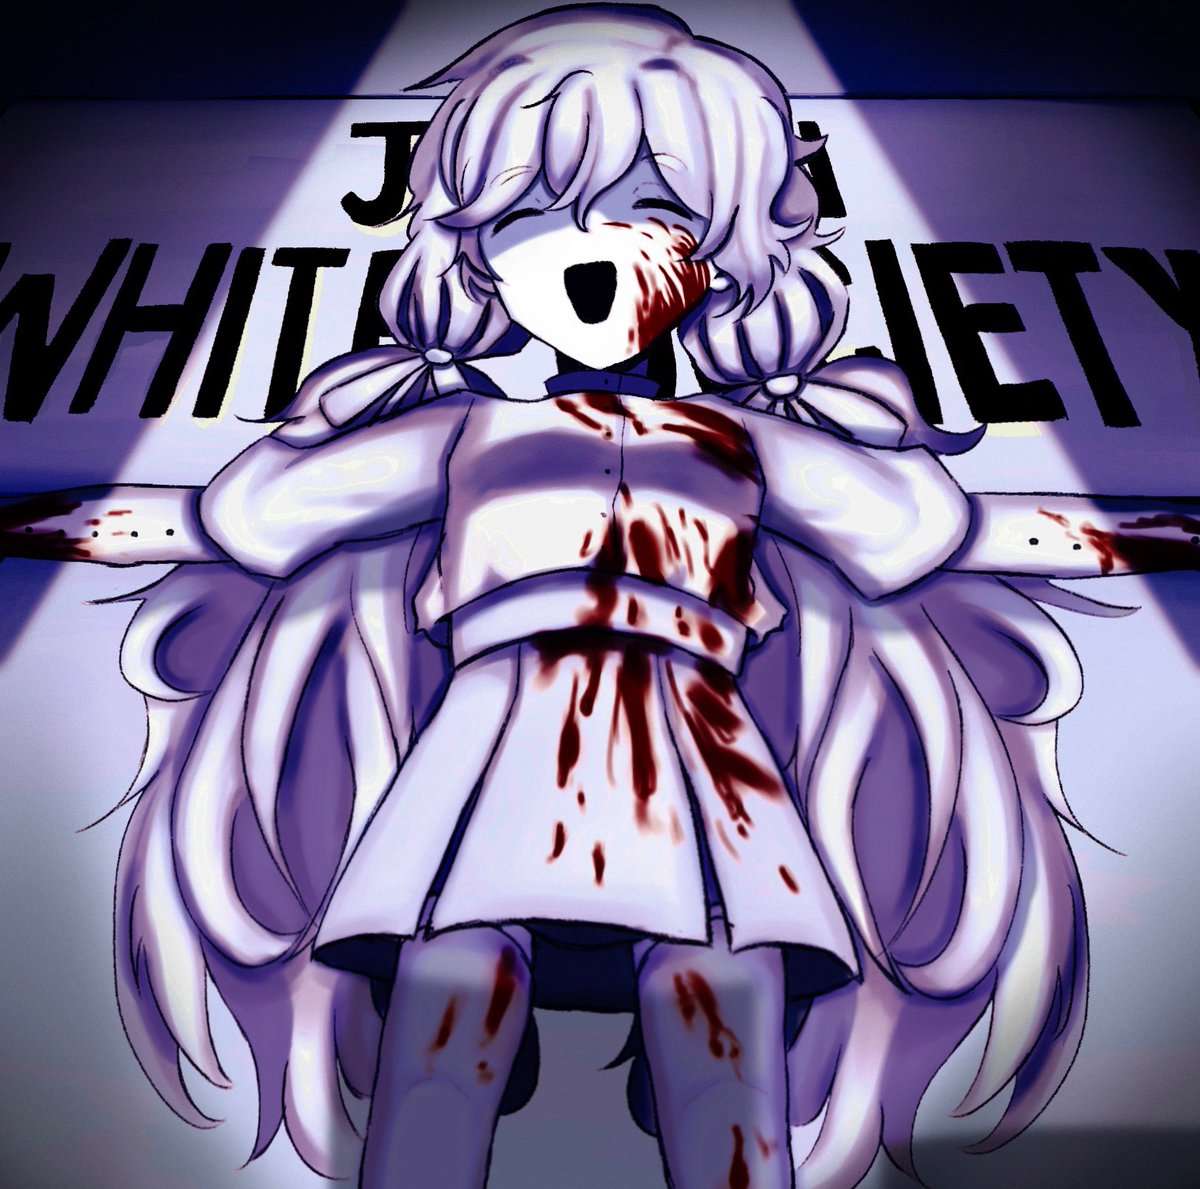 Stay white with us! Join White Society!

#HELLOCHARLOTTE #ПРИВЕТШАРЛОТТА #Q84 #GAMEFANART